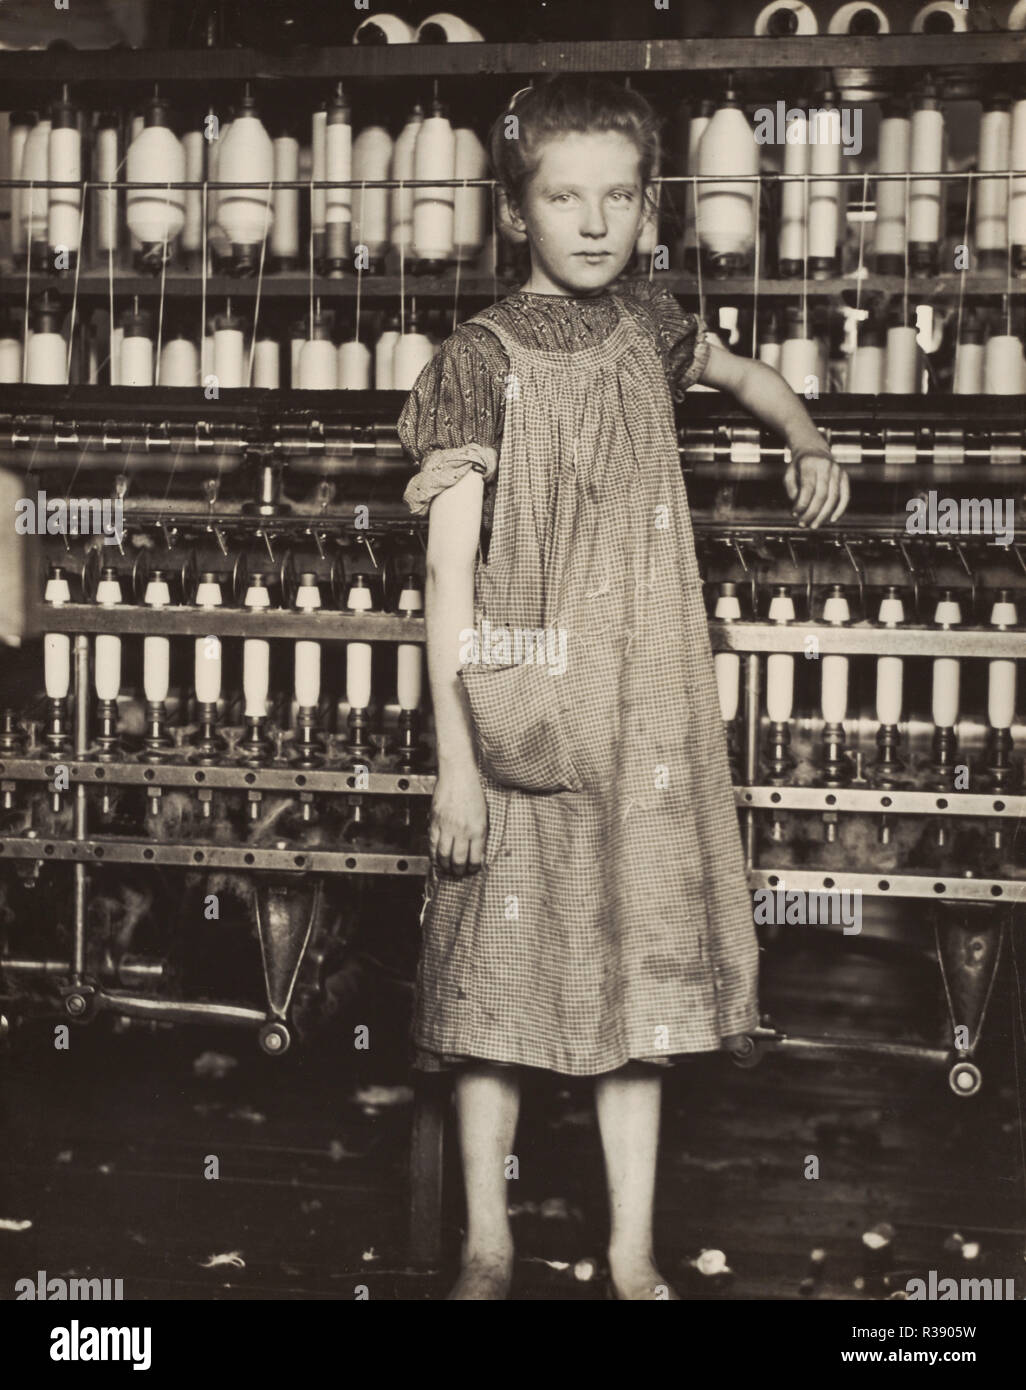 Addie Card, 12 years old. Spinner in cotton mill, North Pownal, Vermont. Dated: 1910. Dimensions: image: 24.1 × 19.2 cm (9 1/2 × 7 9/16 in.). Medium: gelatin silver print. Museum: National Gallery of Art, Washington DC. Author: Lewis Hine. Stock Photo